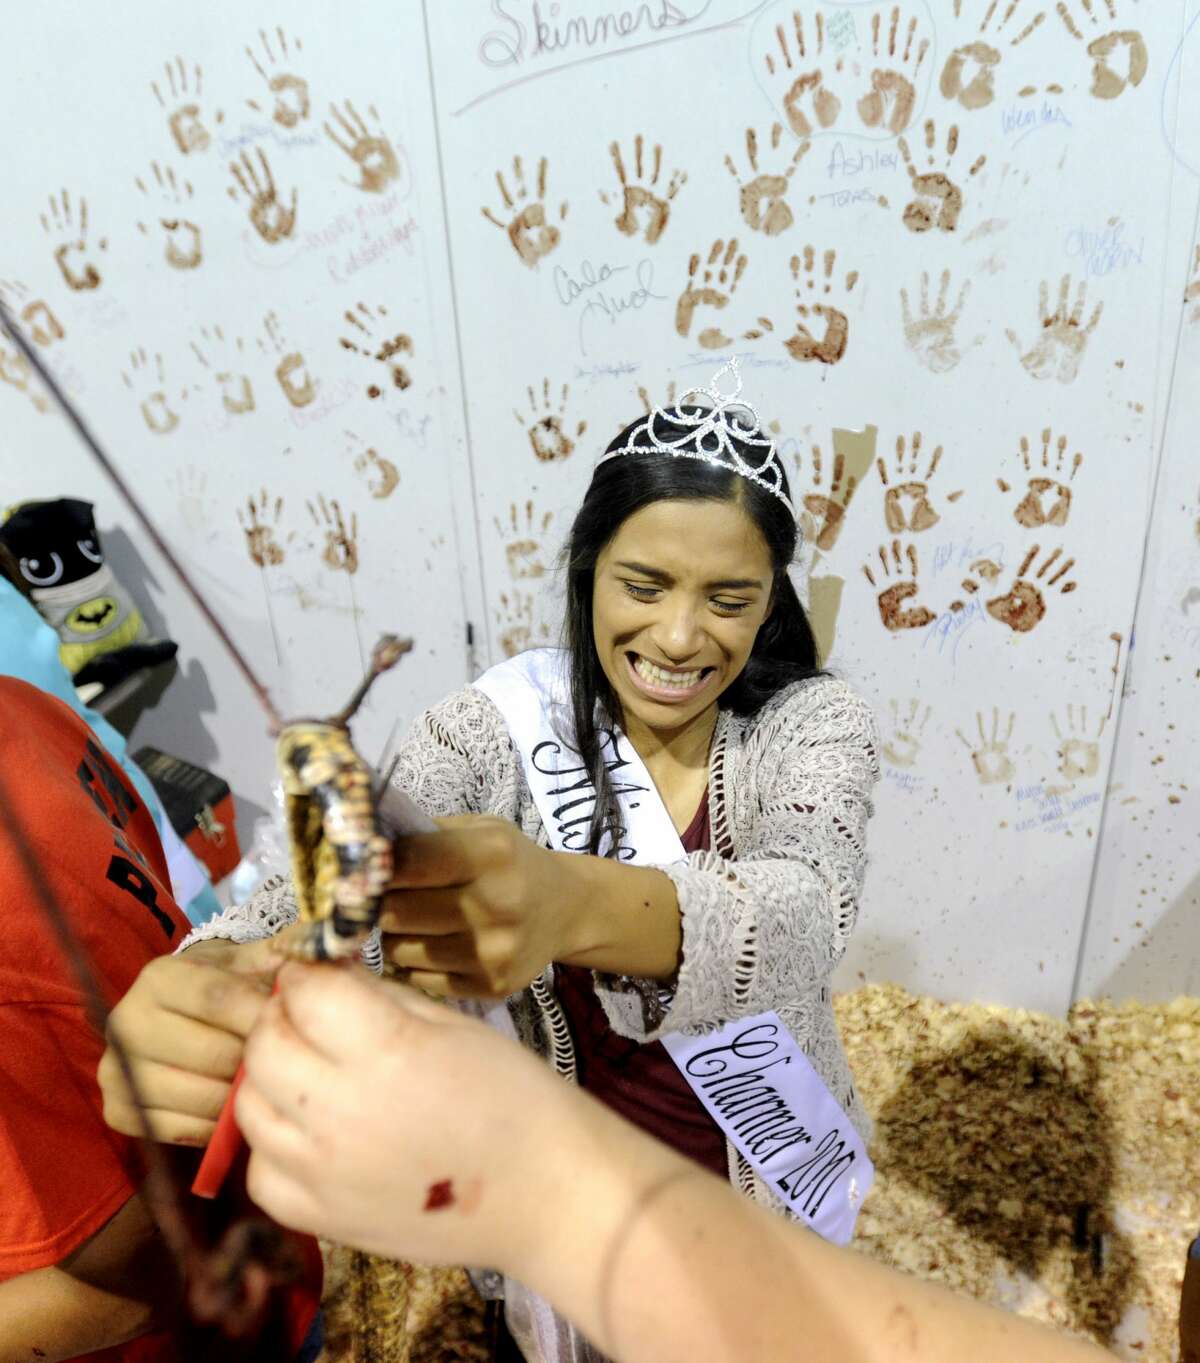 Miss Snake Charmer 2017, Annaliese Espinoza, 17, skins a snake during the 59th annual World's Largest Rattlesnake Roundup on Saturday, March 11, 2017, at the Nolan County Coliseum in Sweetwater, Texas.(Tommy Metthe/The Abilene Reporter-News via AP)